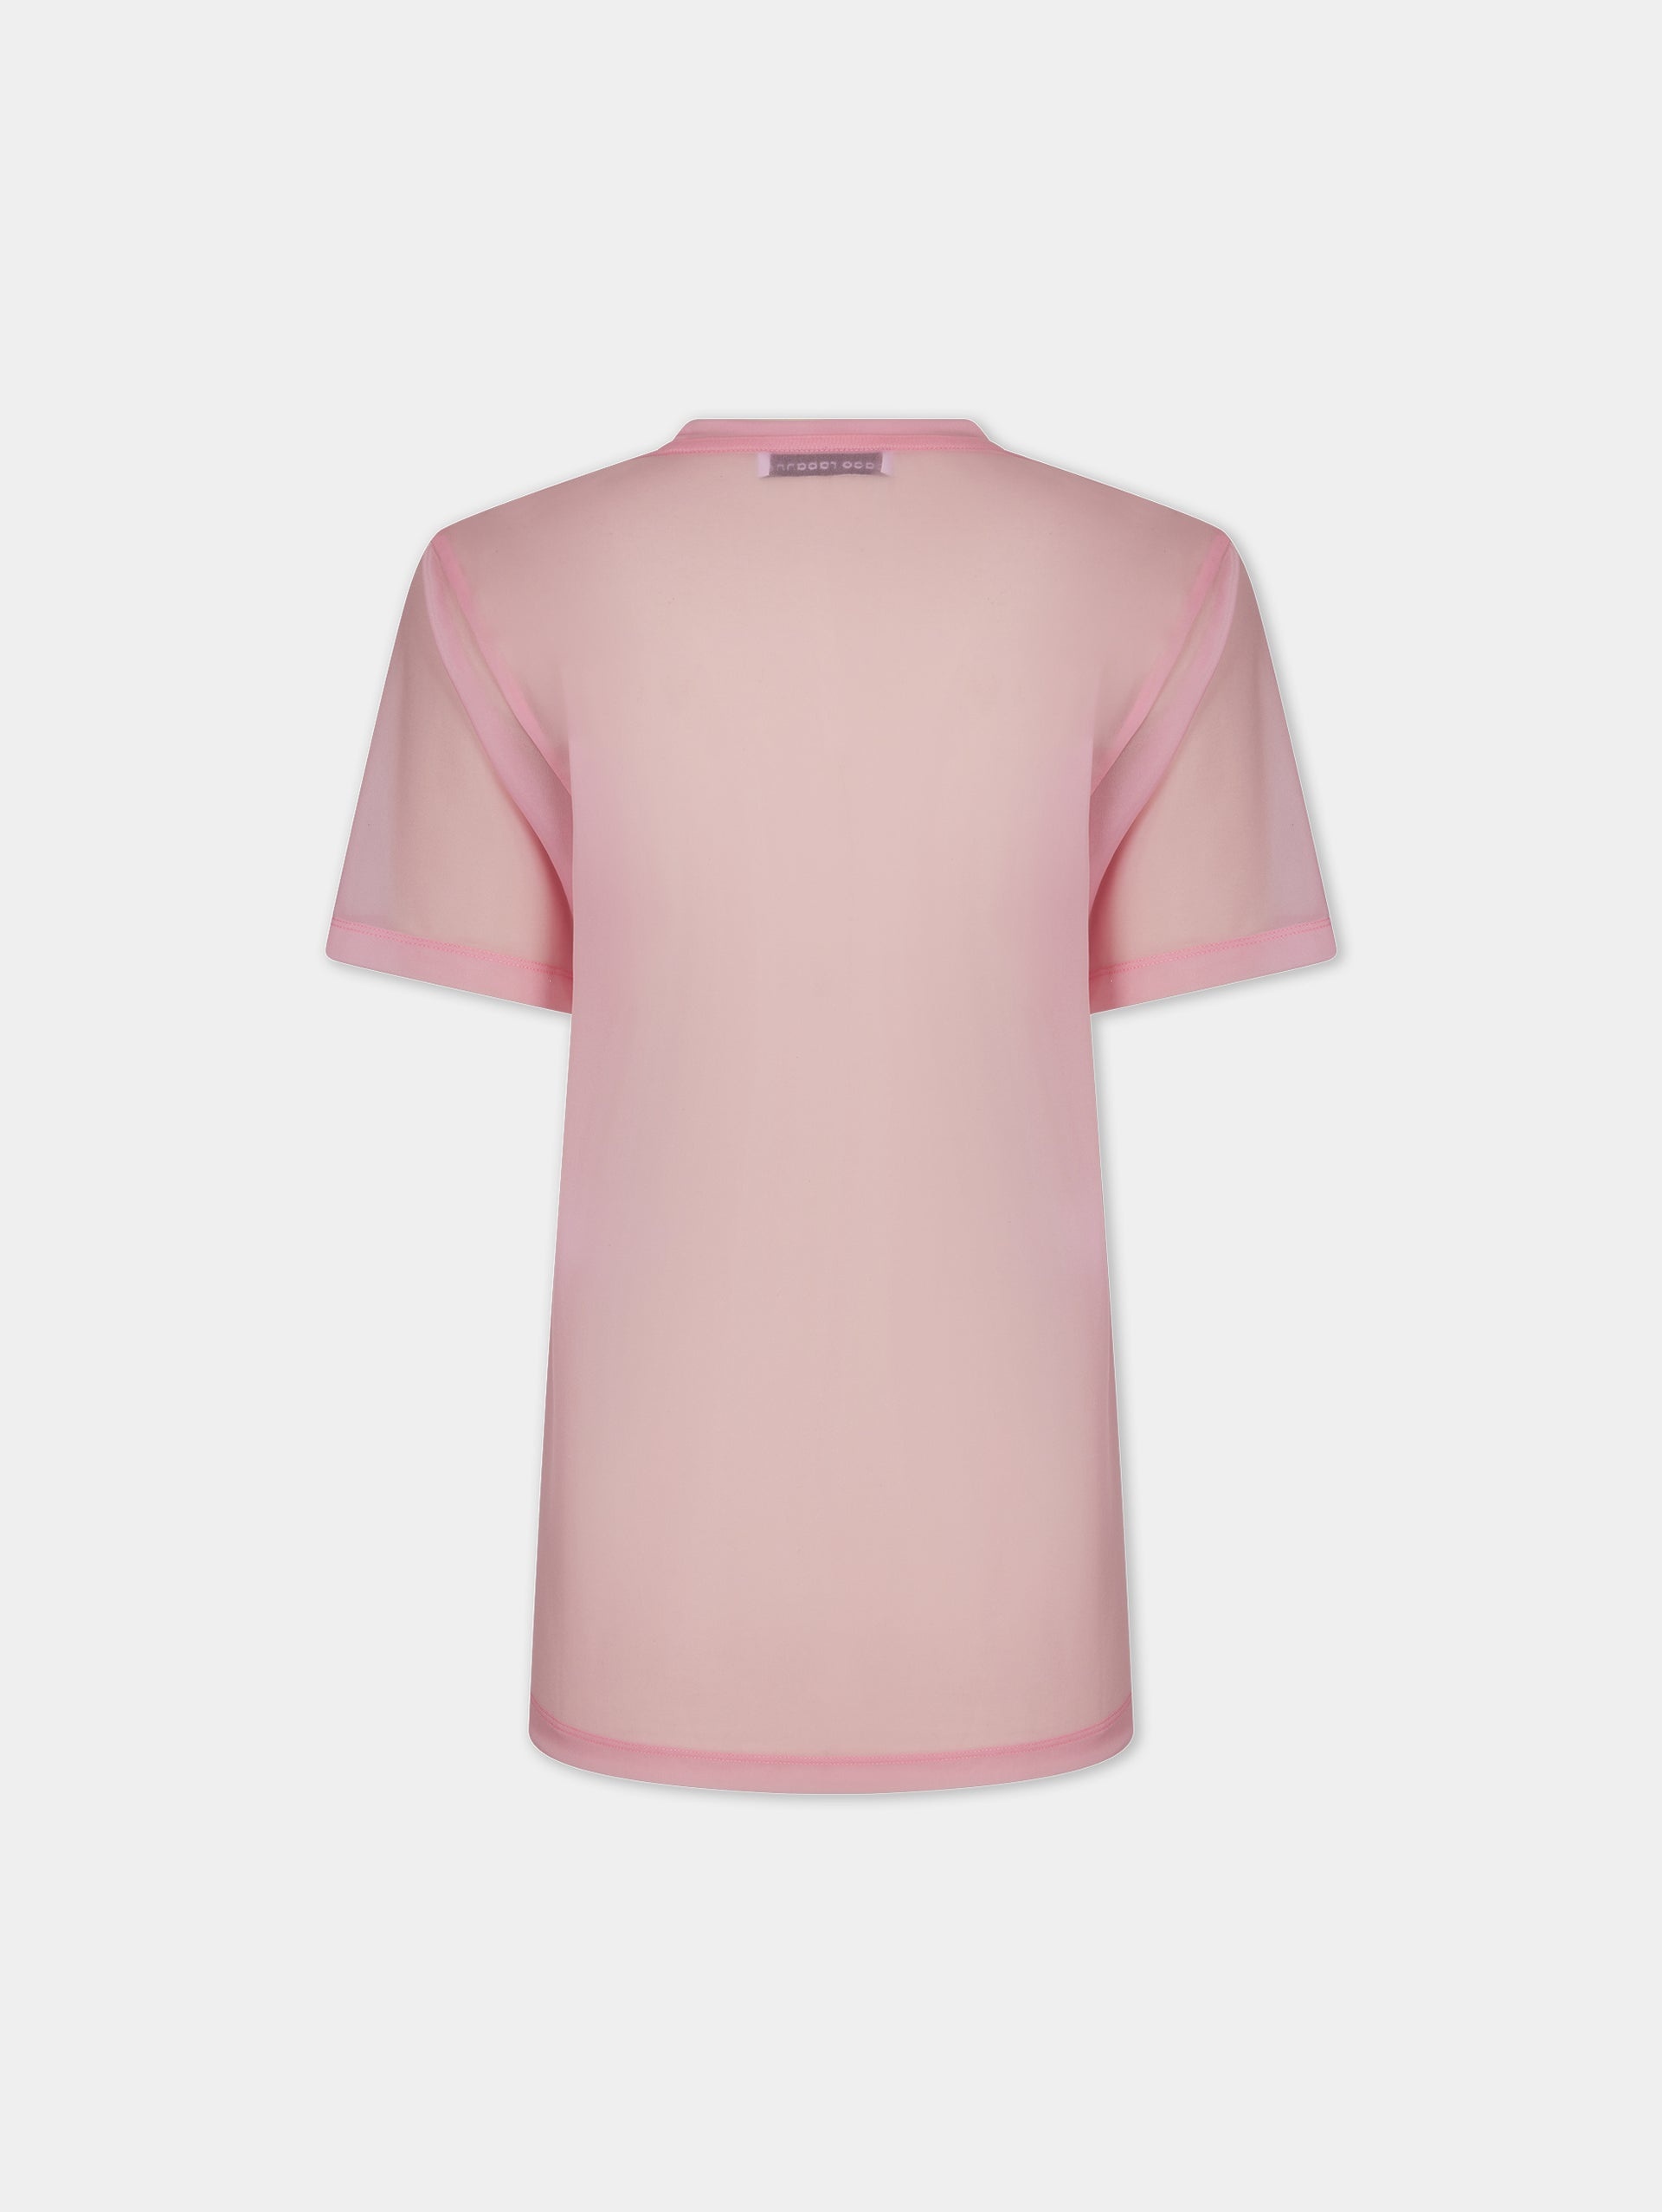 PINK FADED LOGO-PRINTED TOP - 5